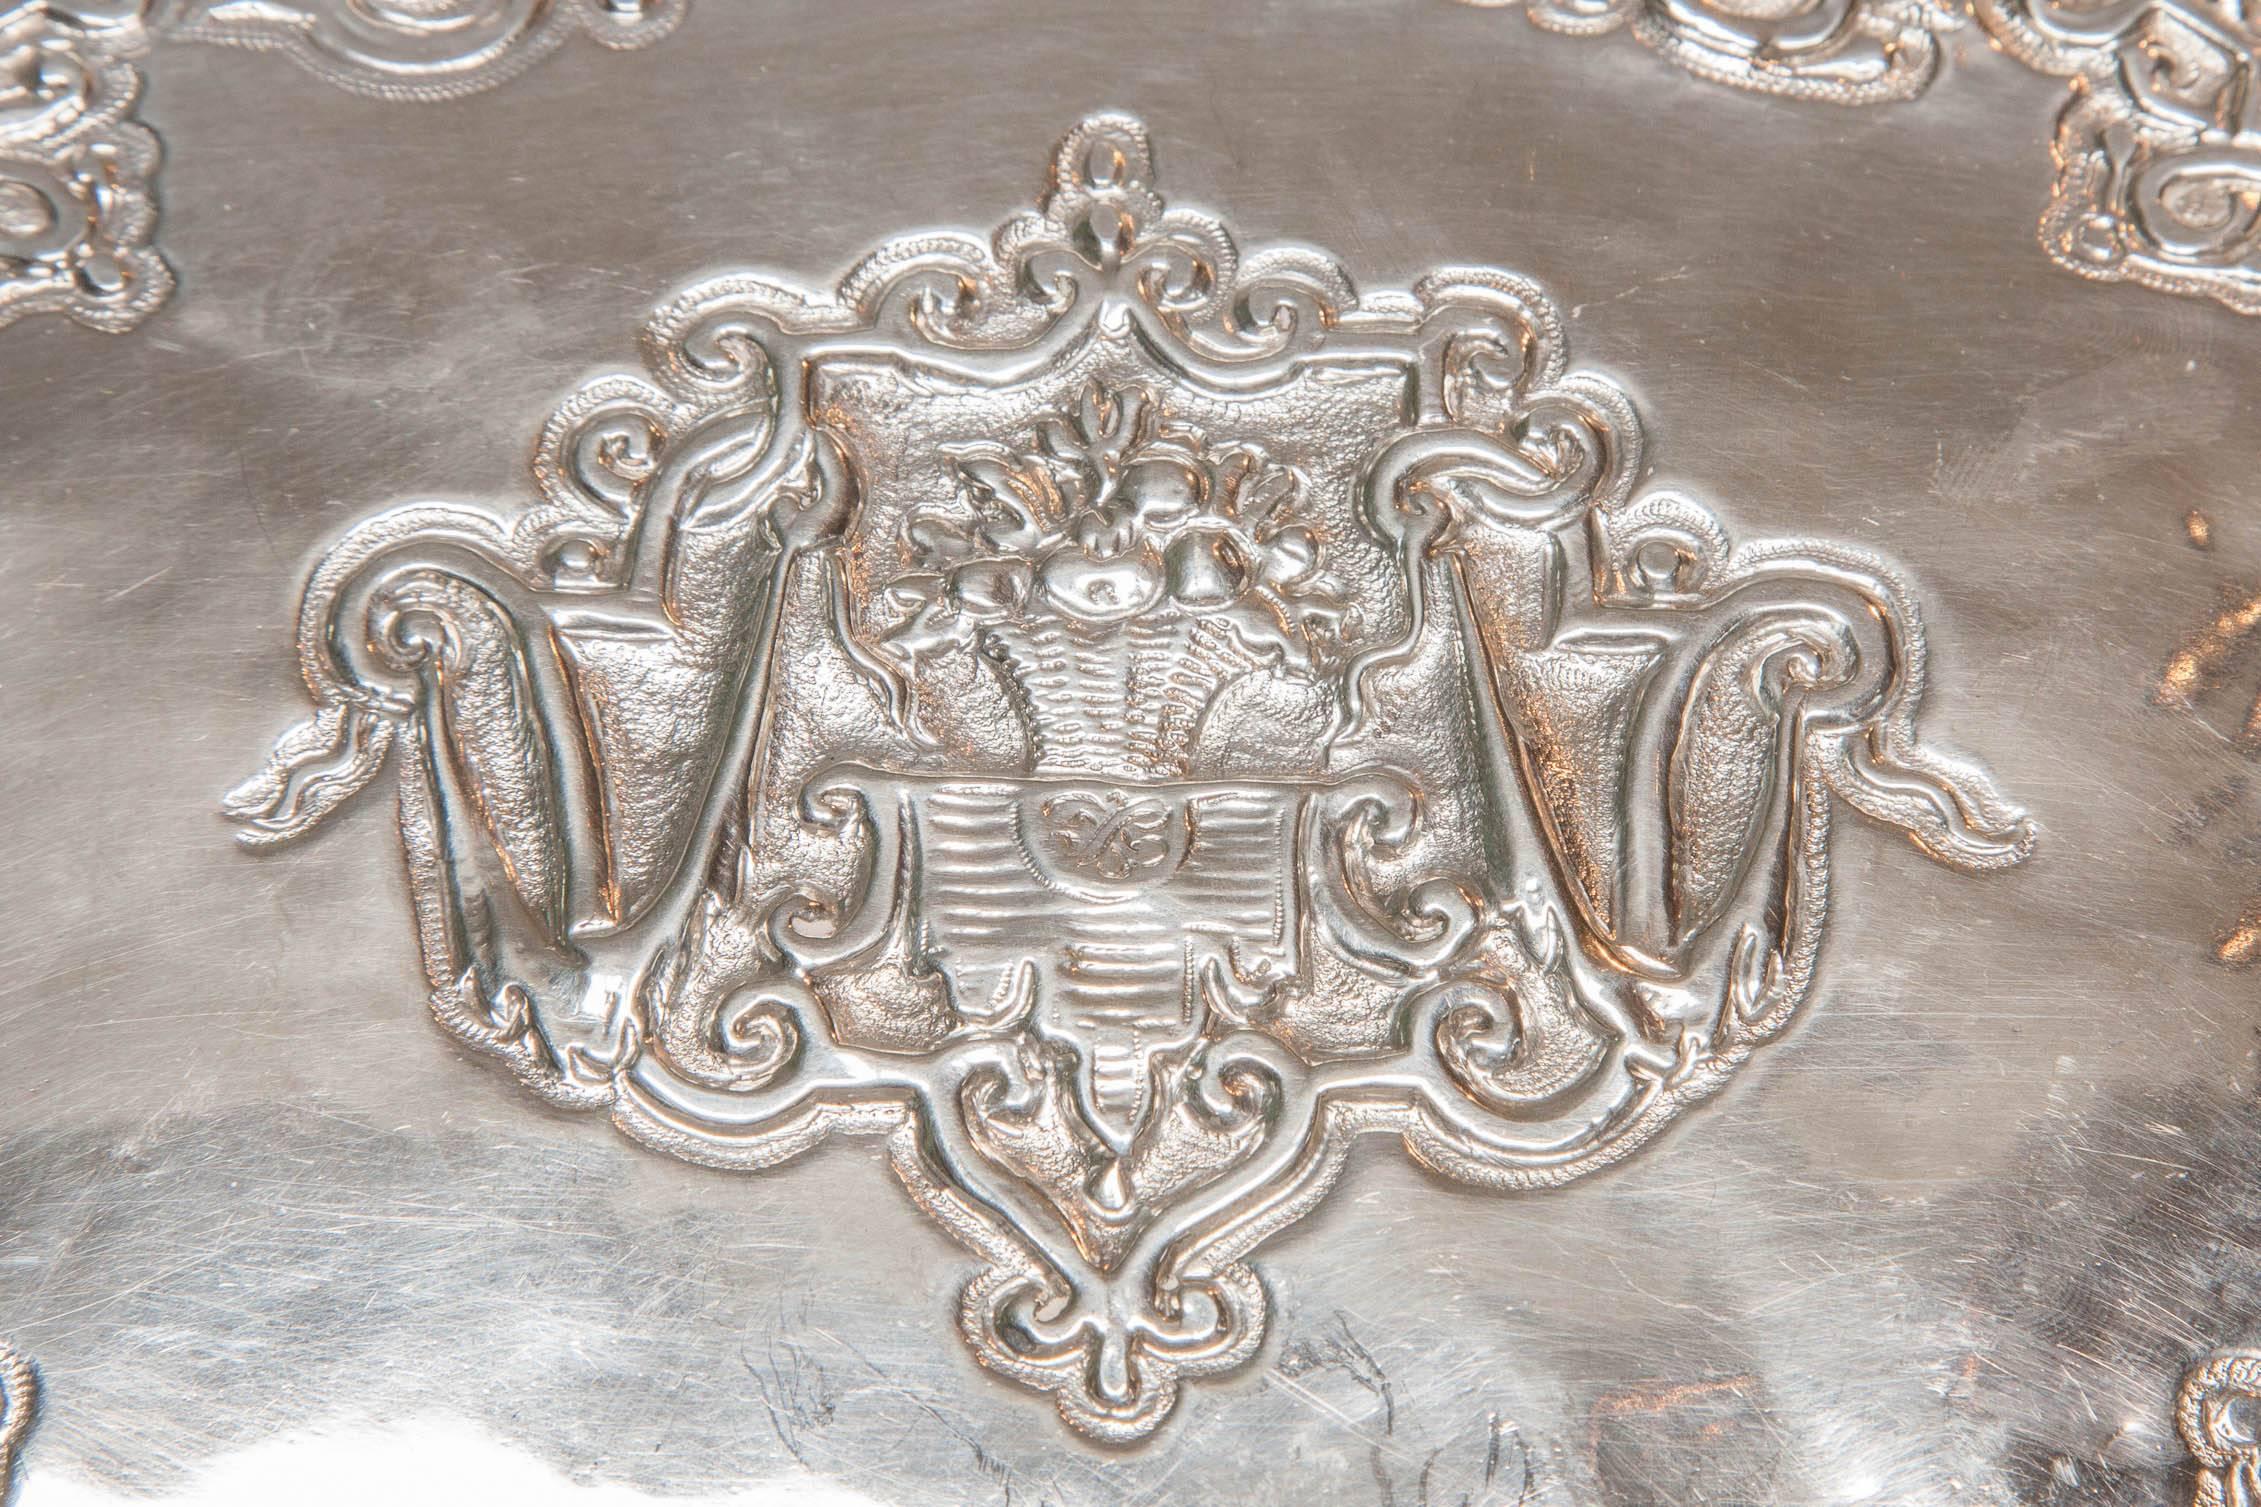 Baroque Mid-17th Century Dutch Silver Repousse' Shaped Glove Tray